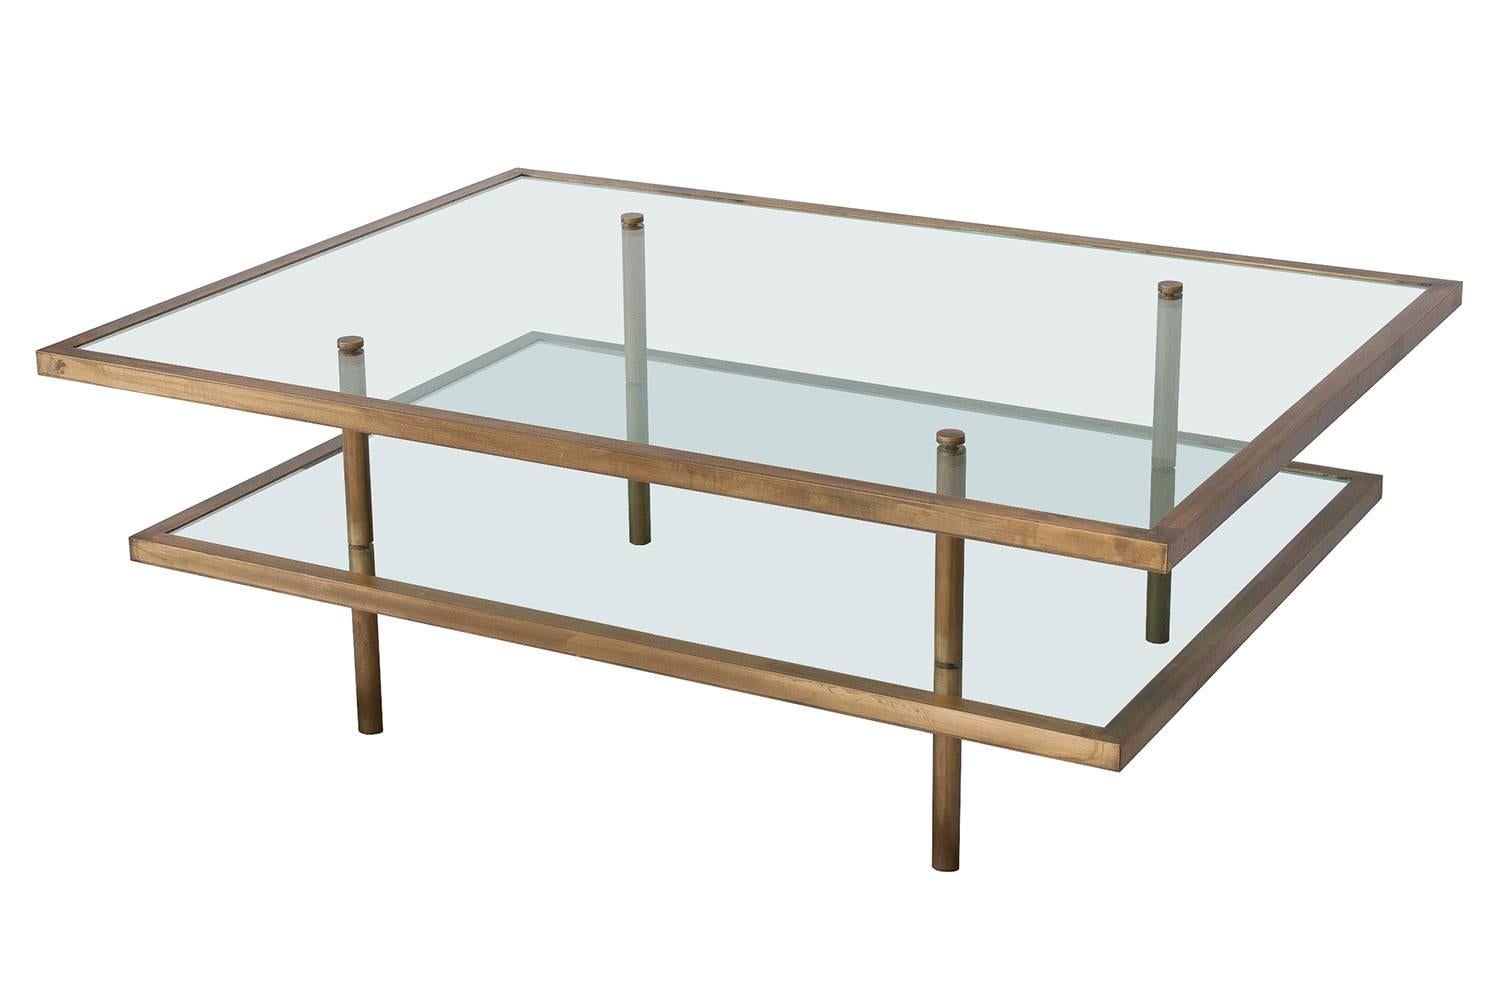 A 1960s French bronze framed glass two-tier coffee table. Glass tiers are framed in 1